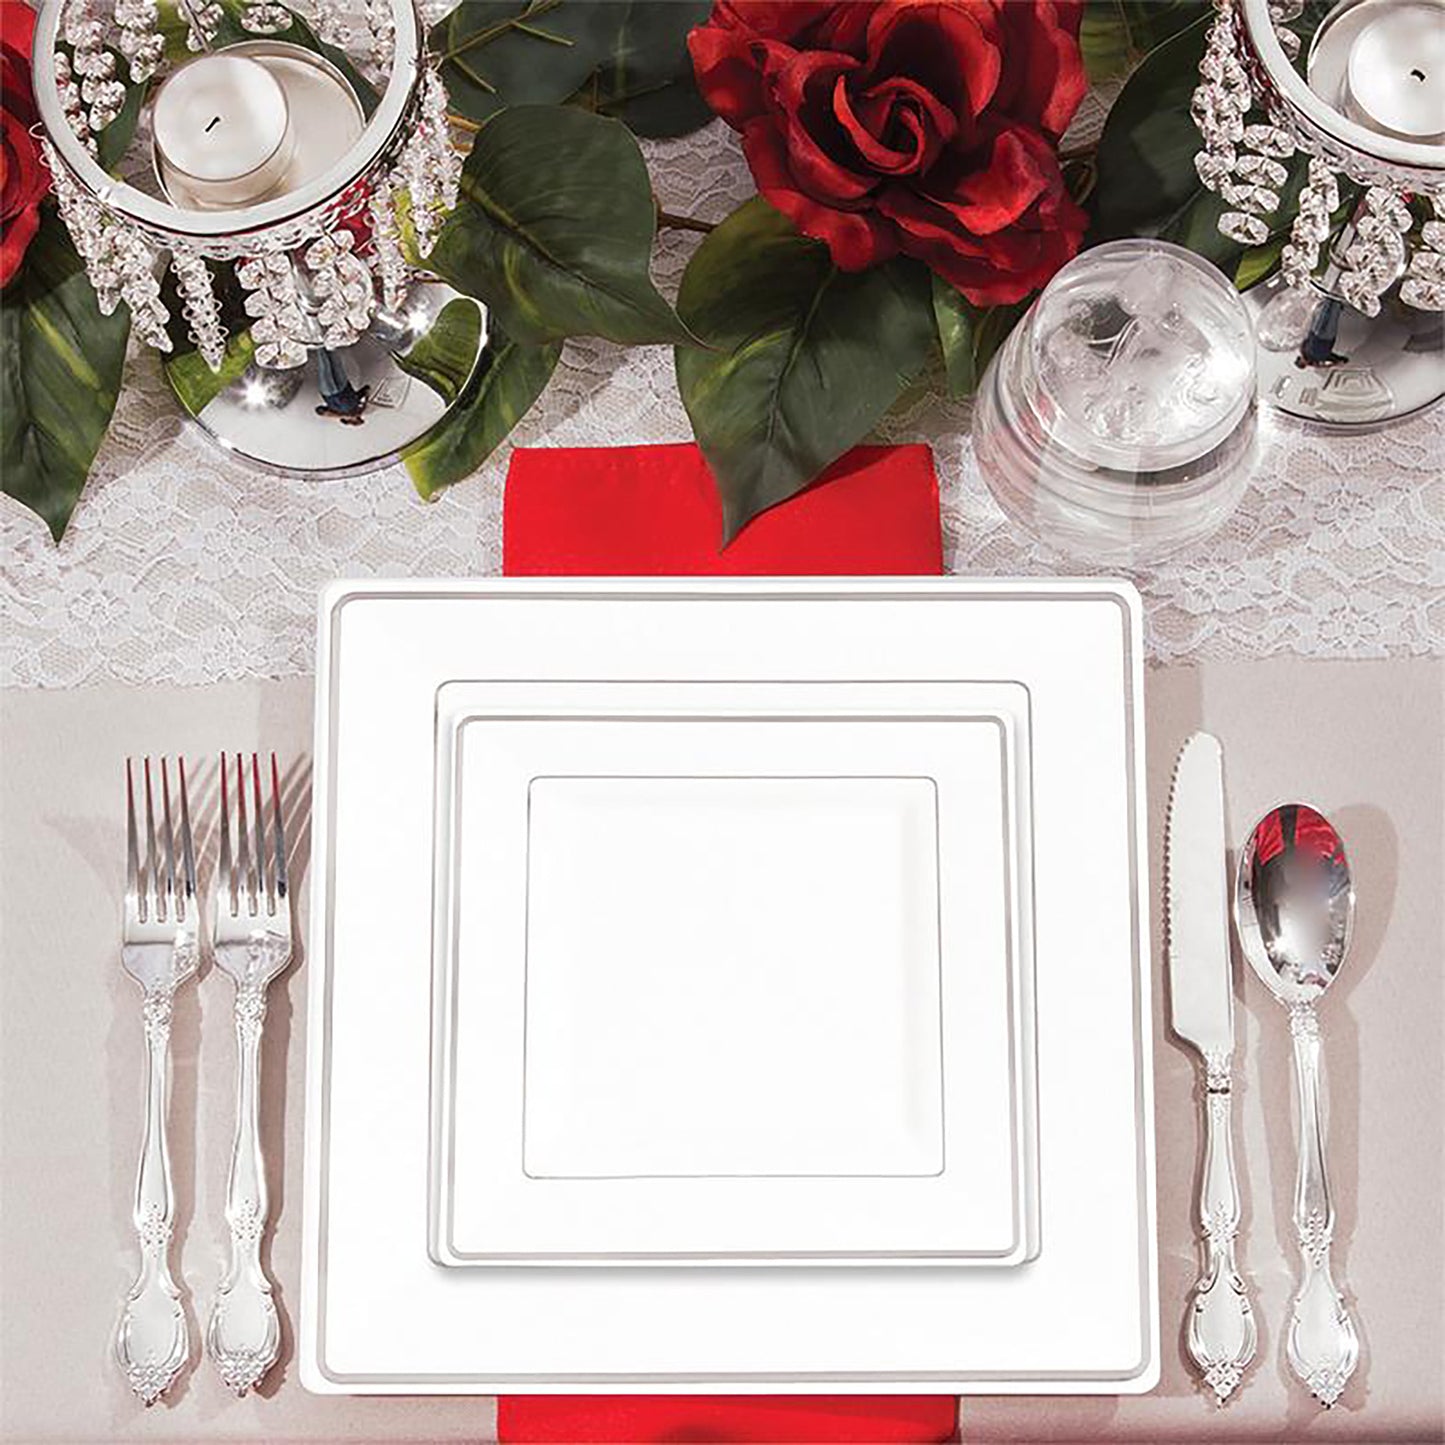 9.5" White with Silver Square Edge Rim Disposable Plastic Dinner Plates Wedding Set | Kaya Collection